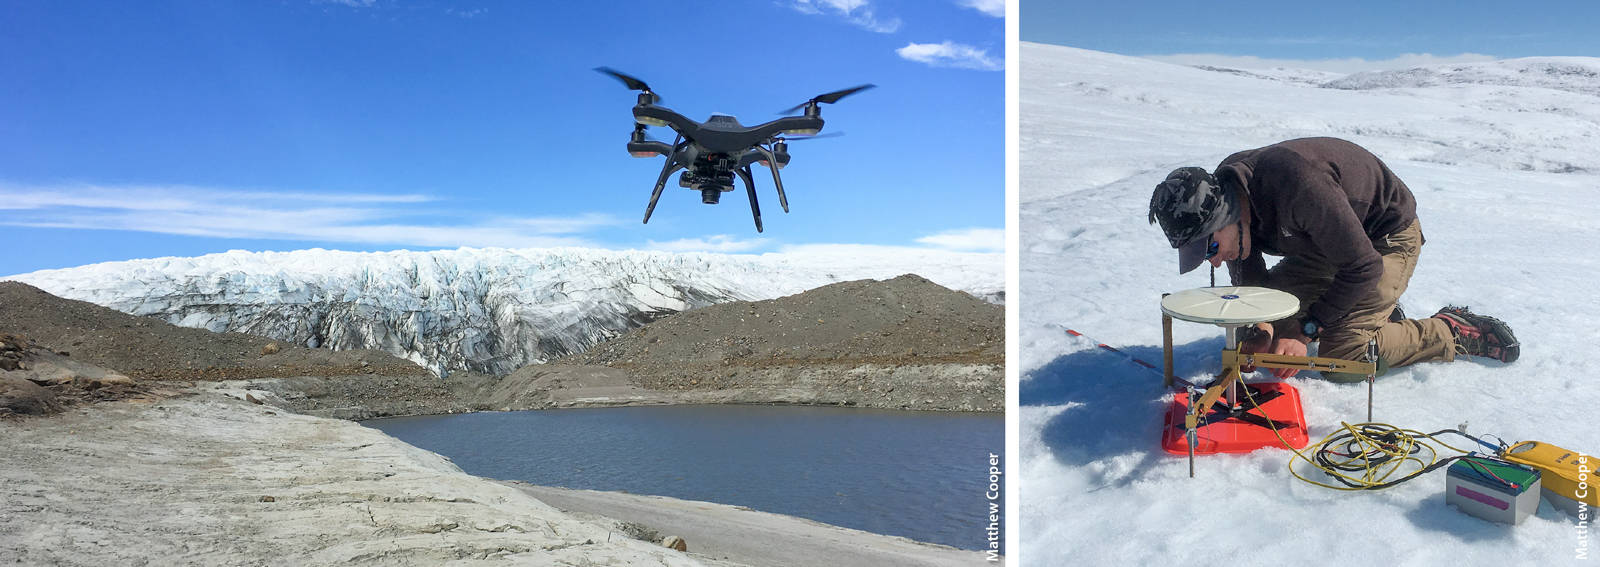 Above left, a 3D Robotics Solo drone carrying a Canon S110 camera flies a mapping mission over a lake in western Greenland the day after a jökulhlaup (a glacial outburst flood). Above right, precise ground control point surveys are needed to accurately geolocate imagery collected with a drone and produce high quality orthomosaics. The photo shows Rutgers University doctoral student Sasha Leidman conducting a differential GPS survey of a ground control marker on the Greenland ice sheet.